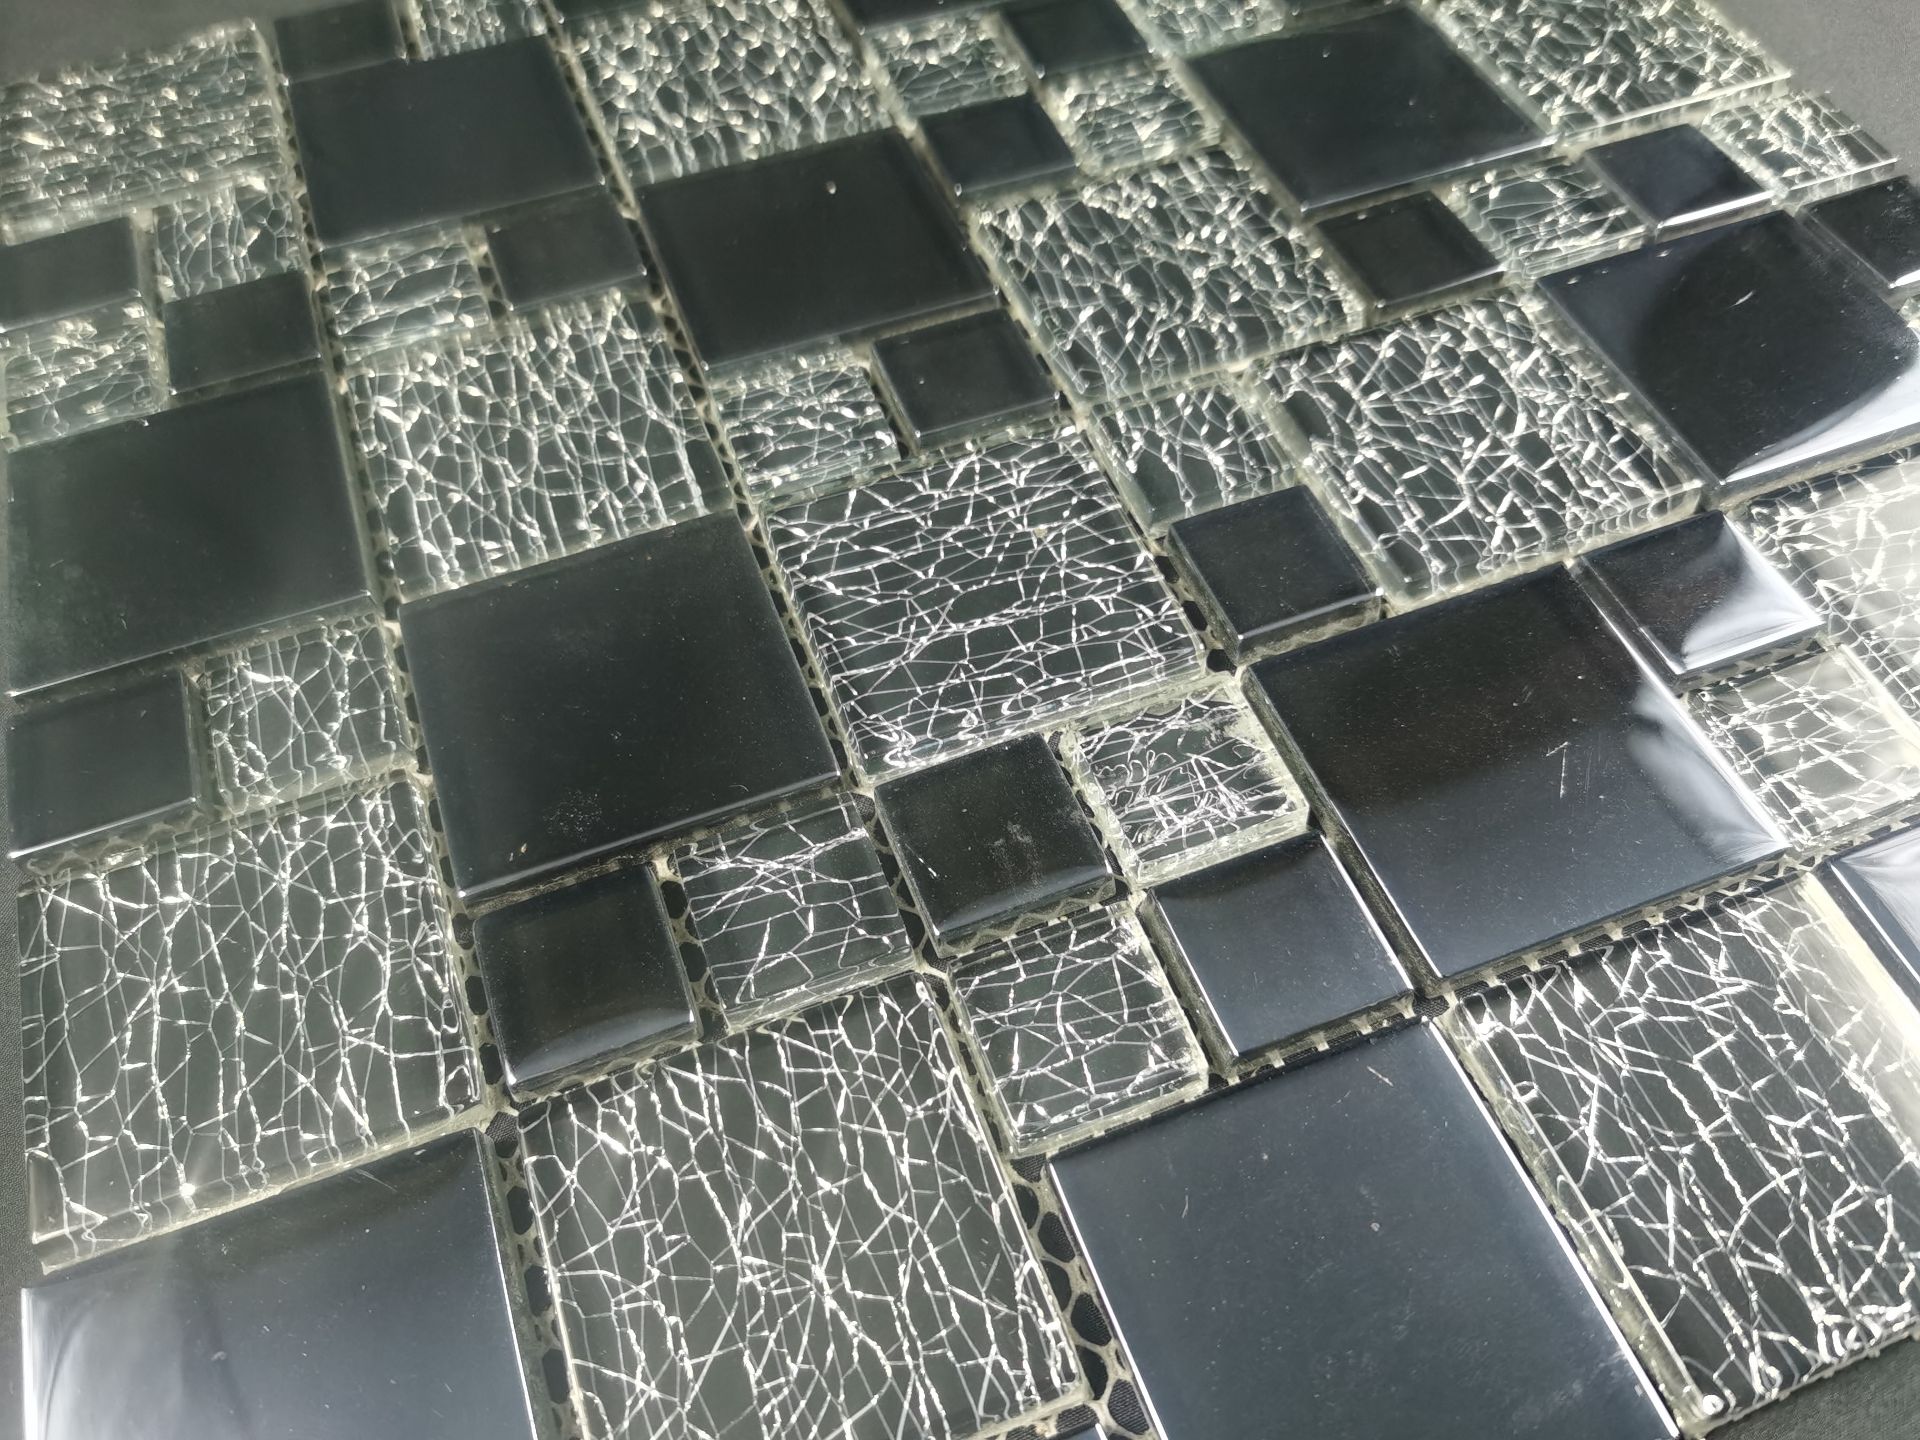 10 Square Metres - High Quality Glass/Stainless Steel Mosaic Tiles -110 sheets - Image 3 of 5